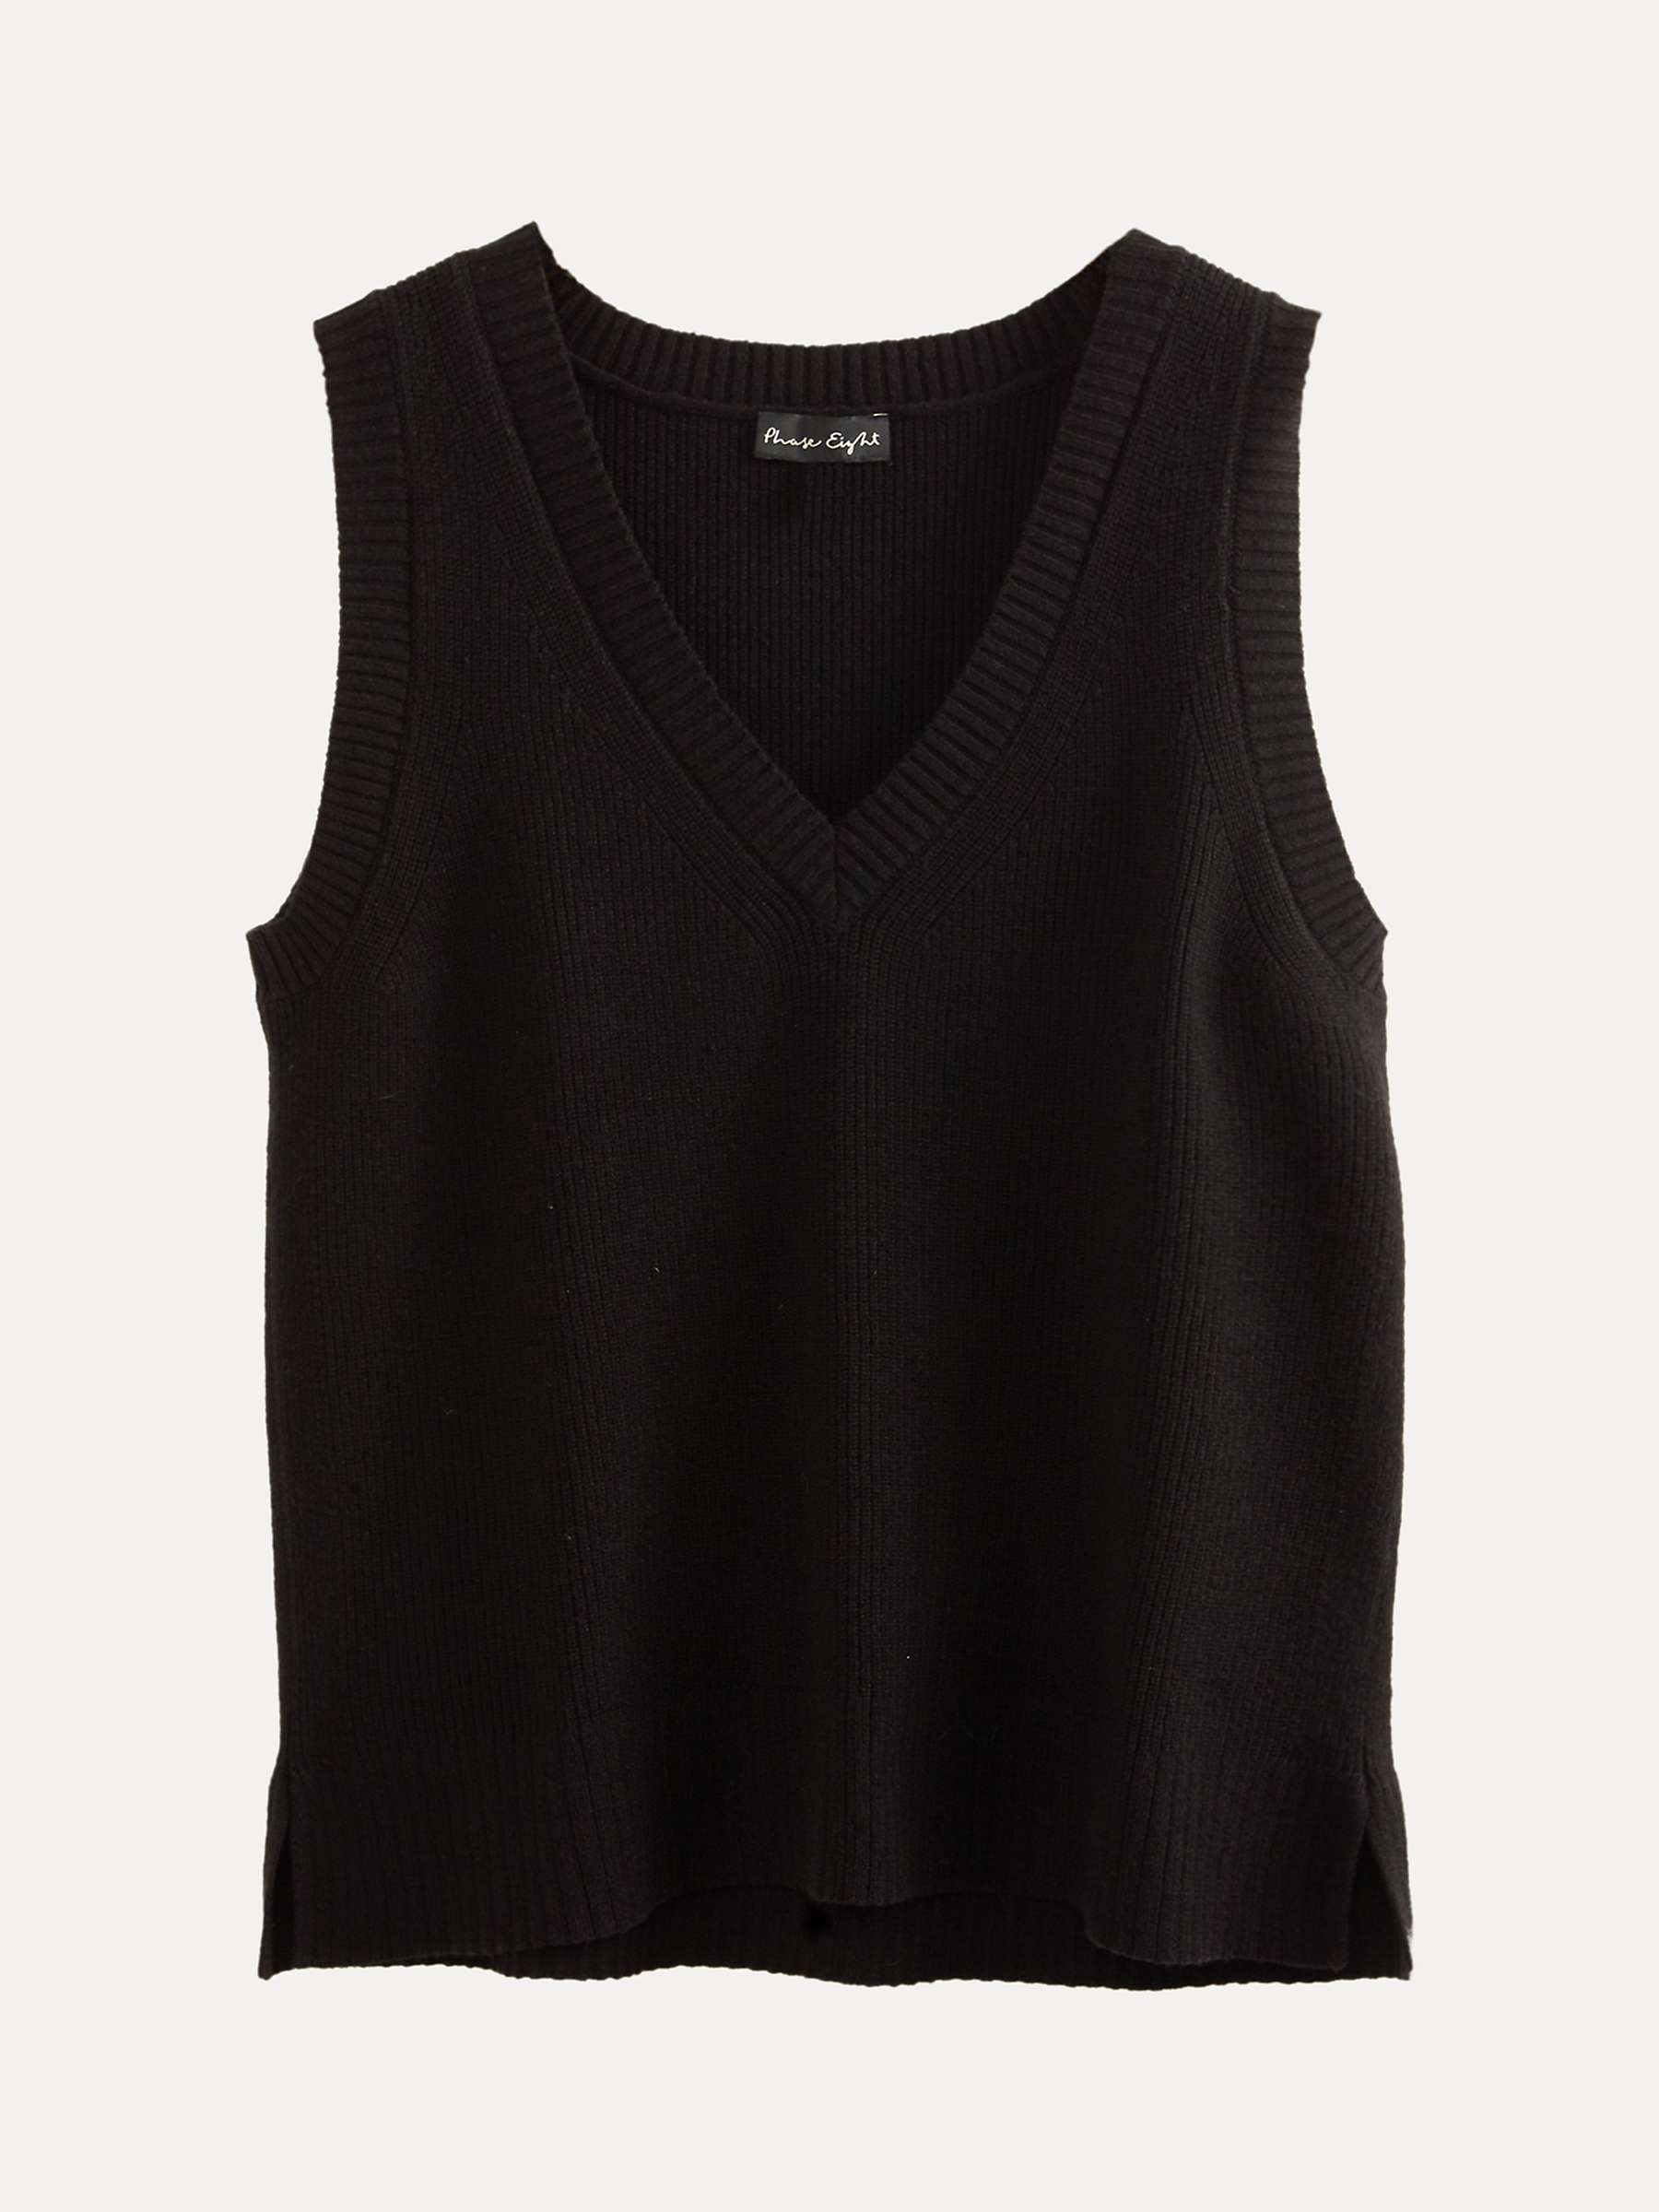 Buy Phase Eight Marianna Knit Tank Top, Black Online at johnlewis.com